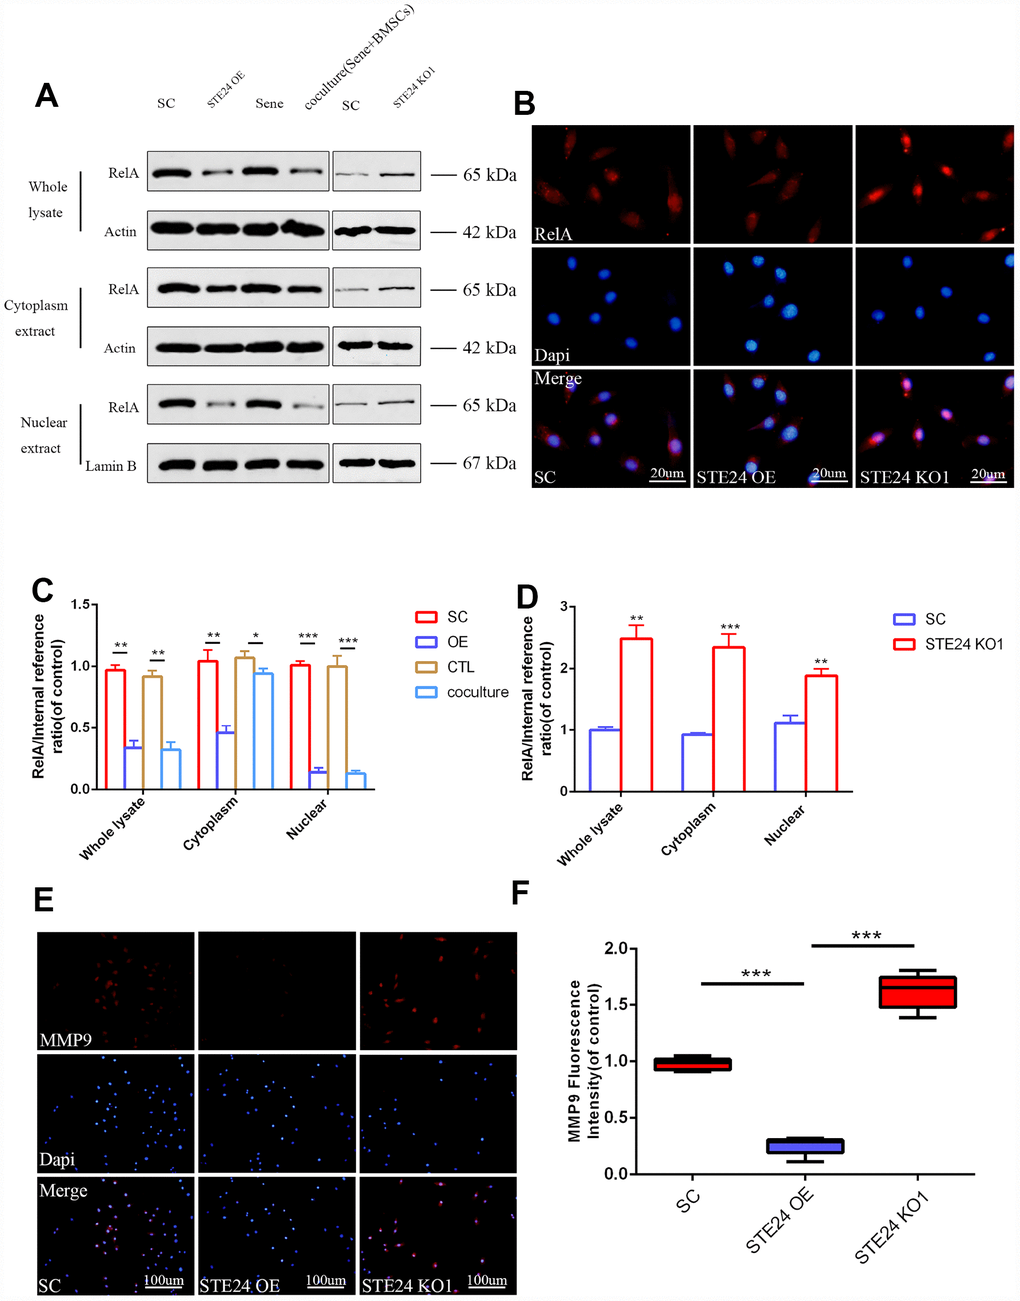 Correlation between ZMPSTE24 and TNF-α induced RelA activation. (A, C, D) Protein expression of RelA with stable empty vector (SC), ZMPSTE24 overexpression or knockout of ZMPSTE24 were visualized by western blot and quantified by Image J. n=3. (B) The nuclear translocation of RelA was detected by immunofluorescence combined with DAPI staining for nuclei. n=5. Scale bar: 20 μm. (E–F) Immunofluorescence staining of MMP9 combined with DAPI staining for nuclei. n=5, Scale bar, 50um. Values represent means±S.D. Significant differences between different groups are indicated as *P 